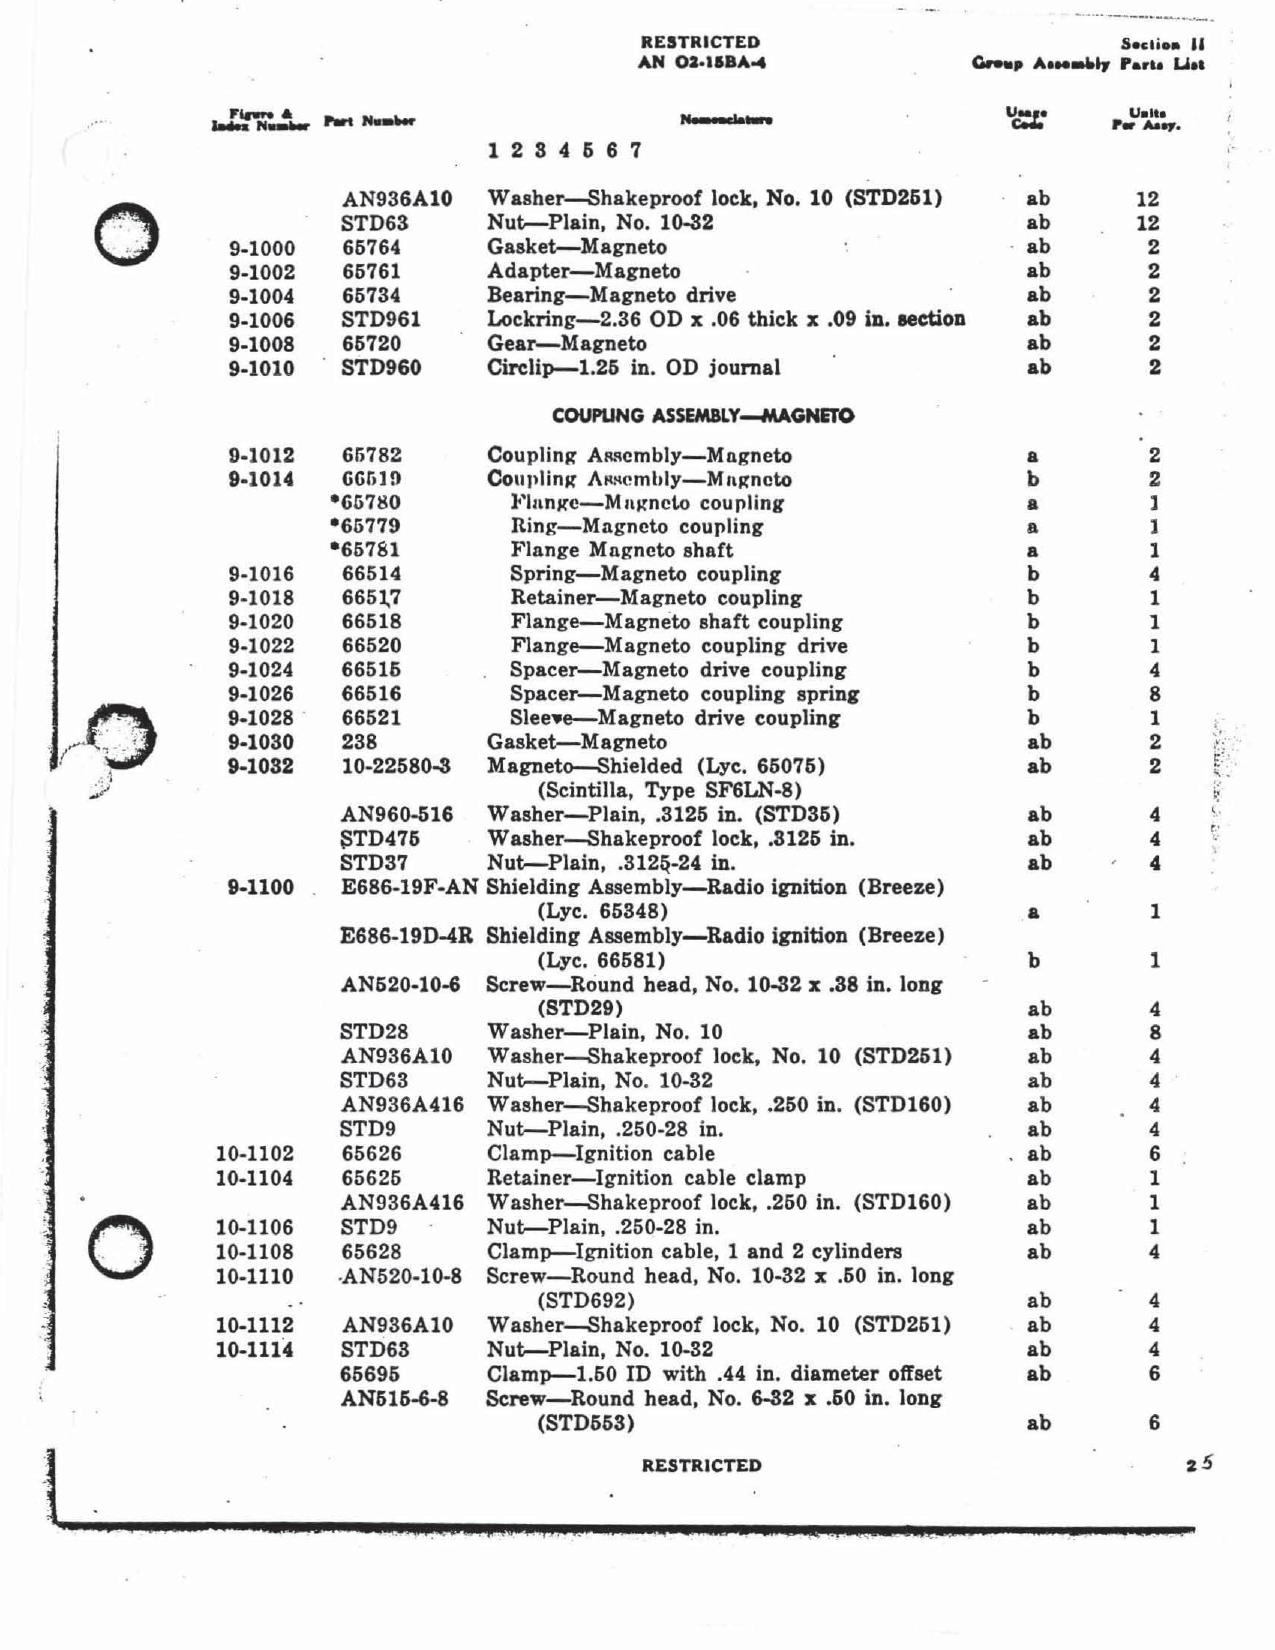 Sample page 28 from AirCorps Library document: Parts Catalog - O-435 Engine